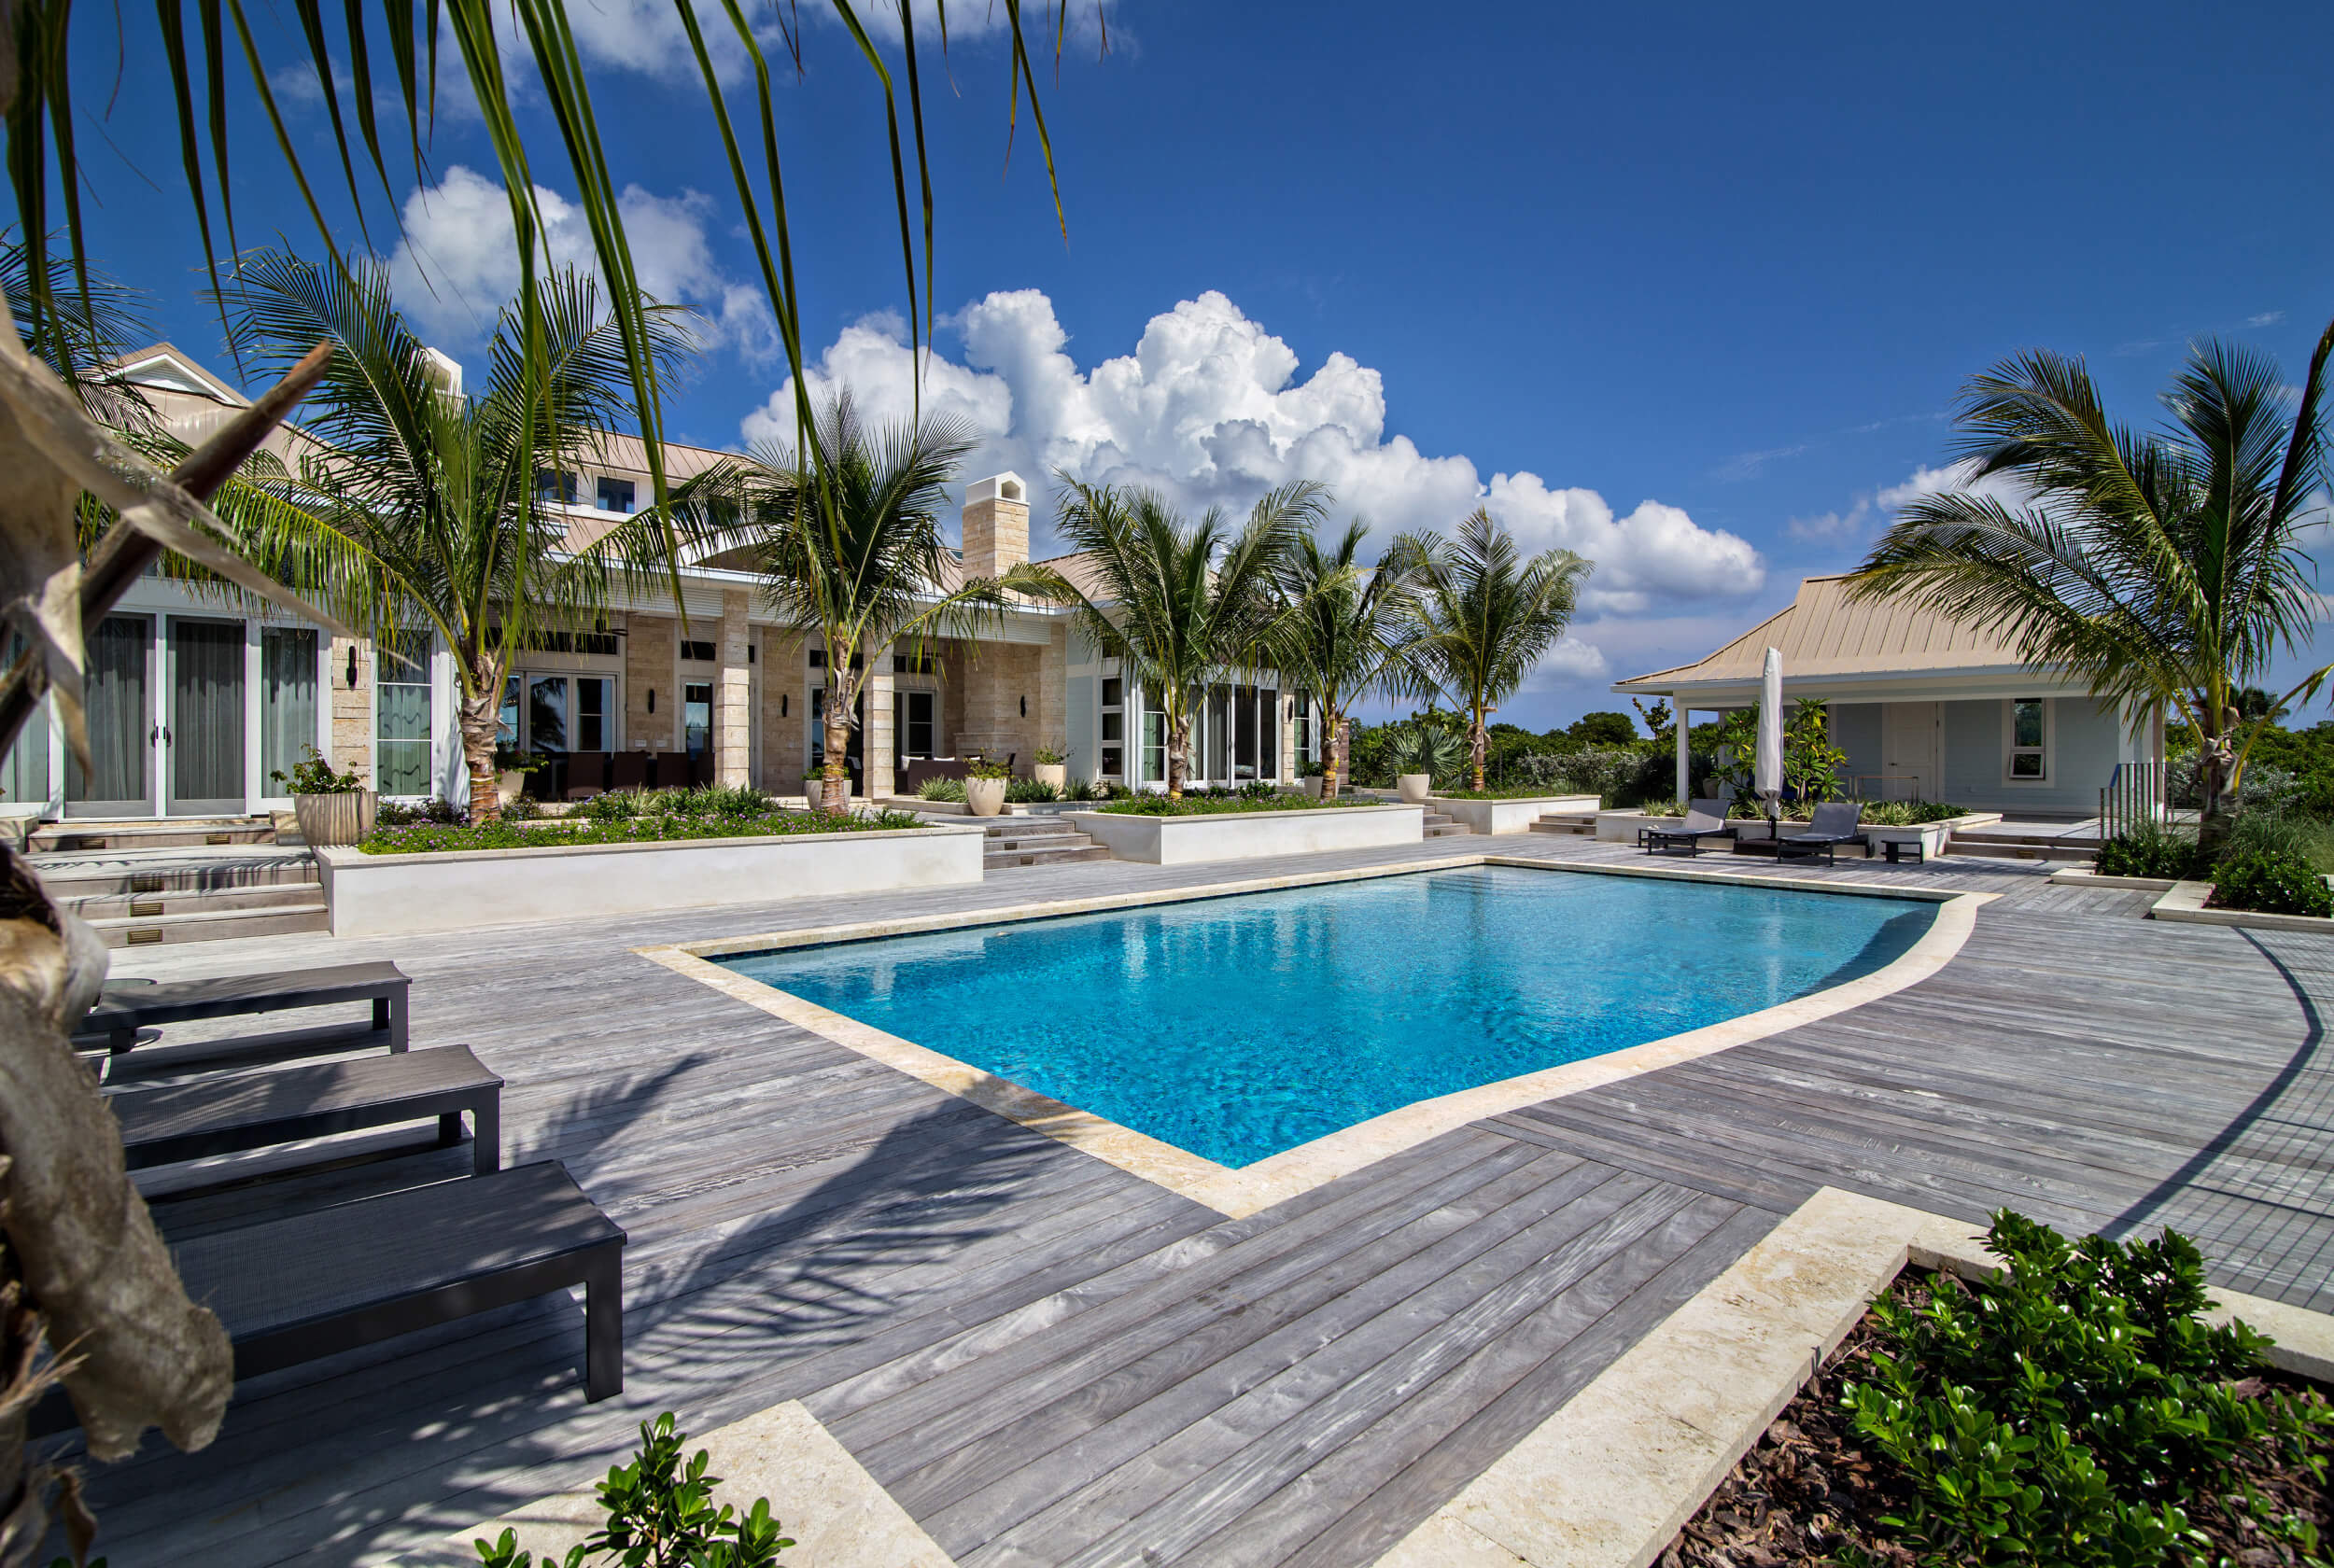 Inviting poolside view at The Abaco Club estate, framed by elegant architecture and palm trees, embodying the serene coastal living in The Bahamas